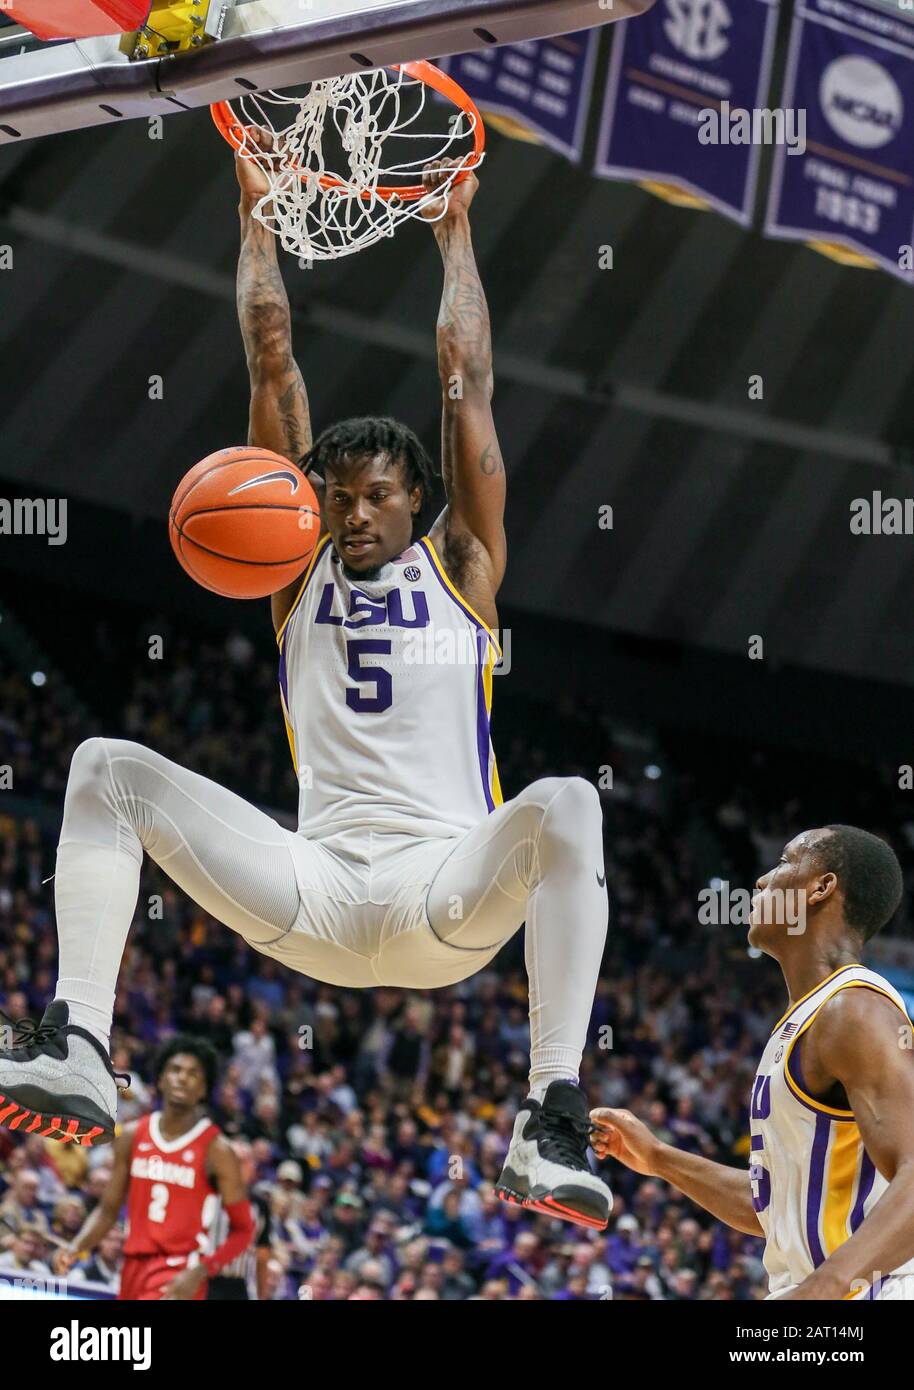 Baton Rouge, LA, USA. 29th Jan, 2020. LSU's Emmitt Williams (5) hangs on the rim after a big dunk during NCAA Basketball action between the Alabama Crimson Tide and the LSU Tigers at the Pete Maravich Assembly Center in Baton Rouge, LA. Jonathan Mailhes/CSM/Alamy Live News Stock Photo